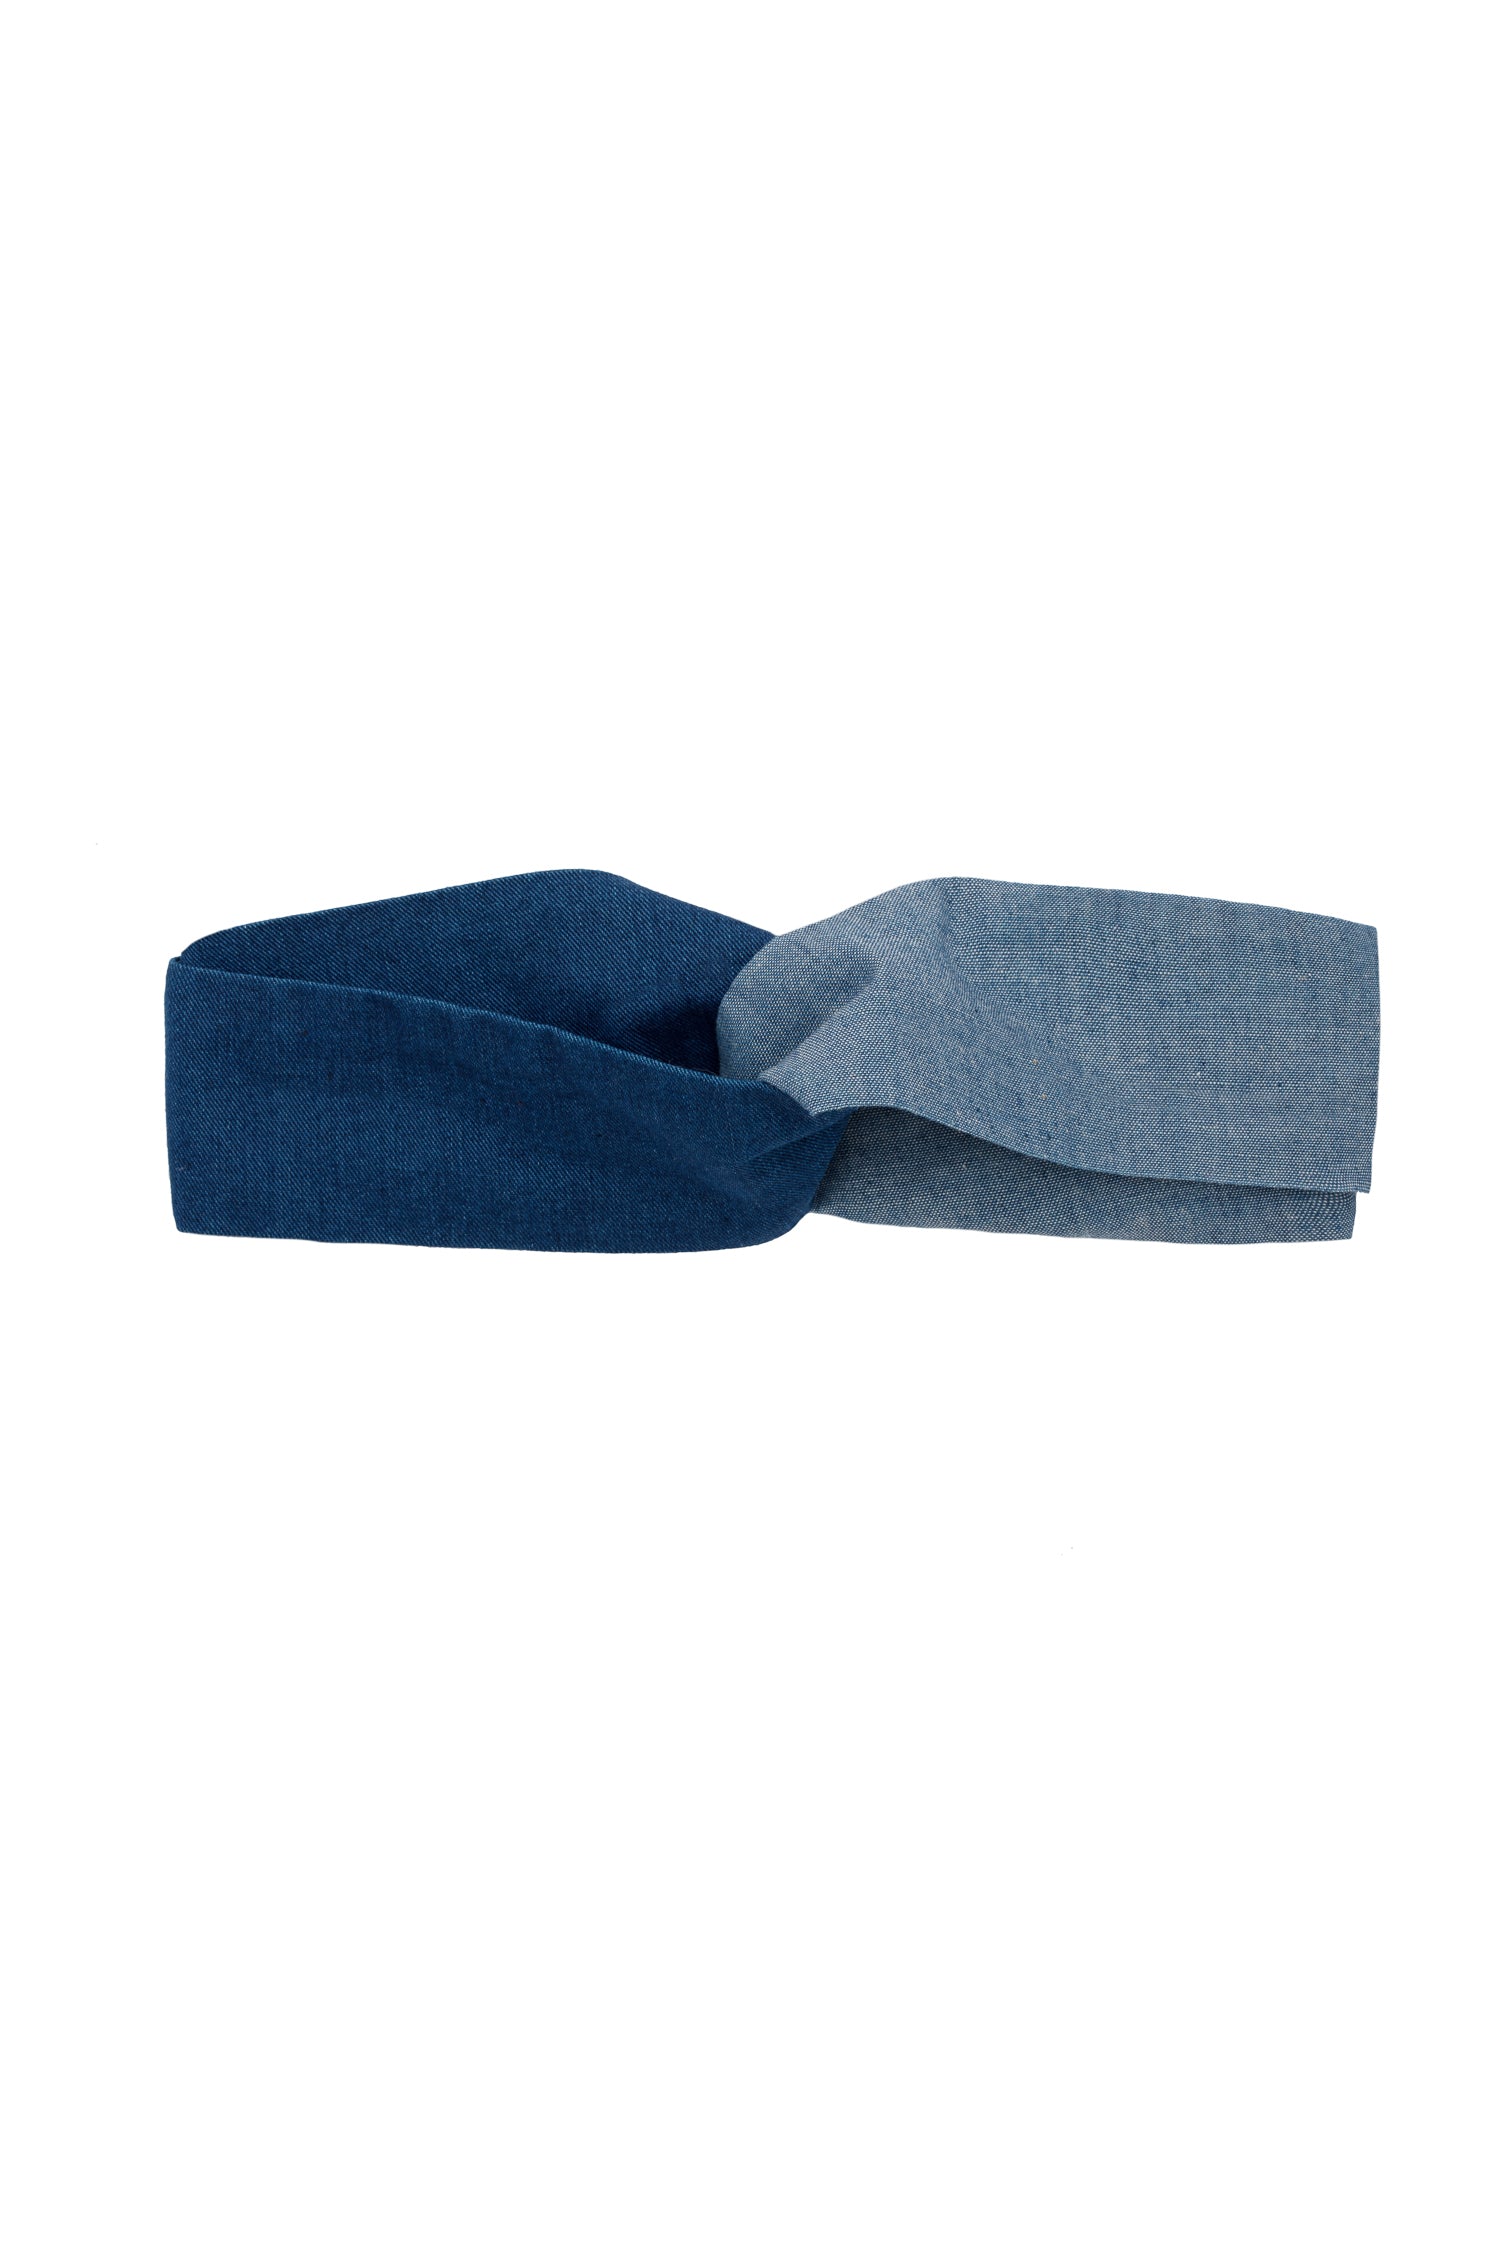 Saywood's Thandi Headband with twist effect, made from contrasting mid wash and light wash natural indigo Japanese denim. Laid flat with only the top of the headband visible.